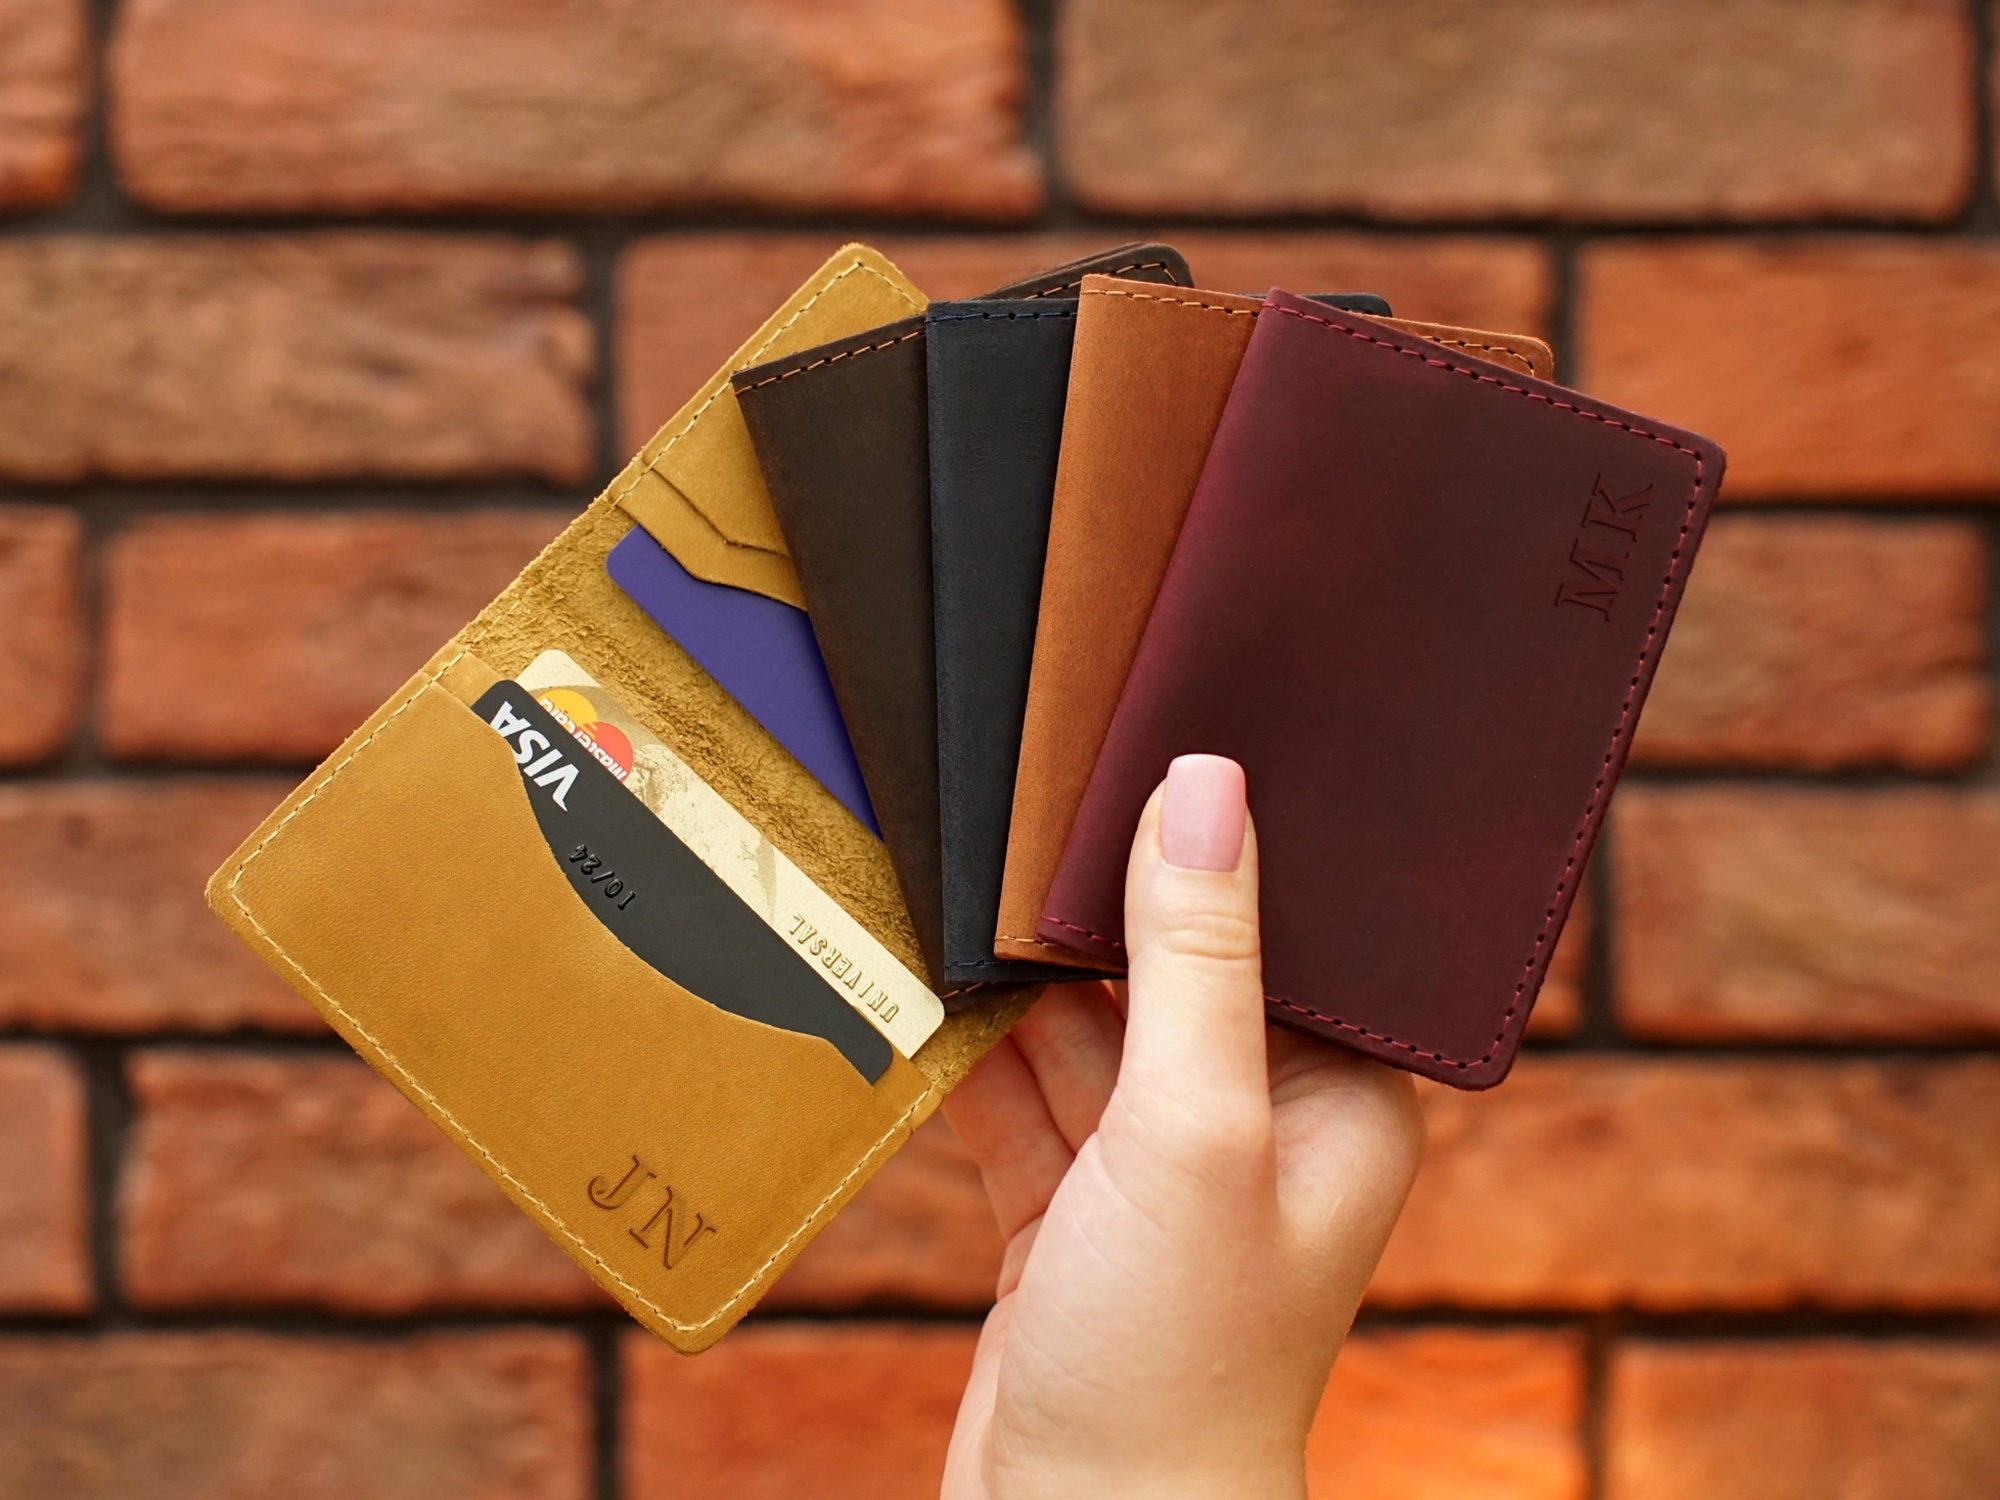 Leather Flip Business Card Holder & Thermograved Business Cards